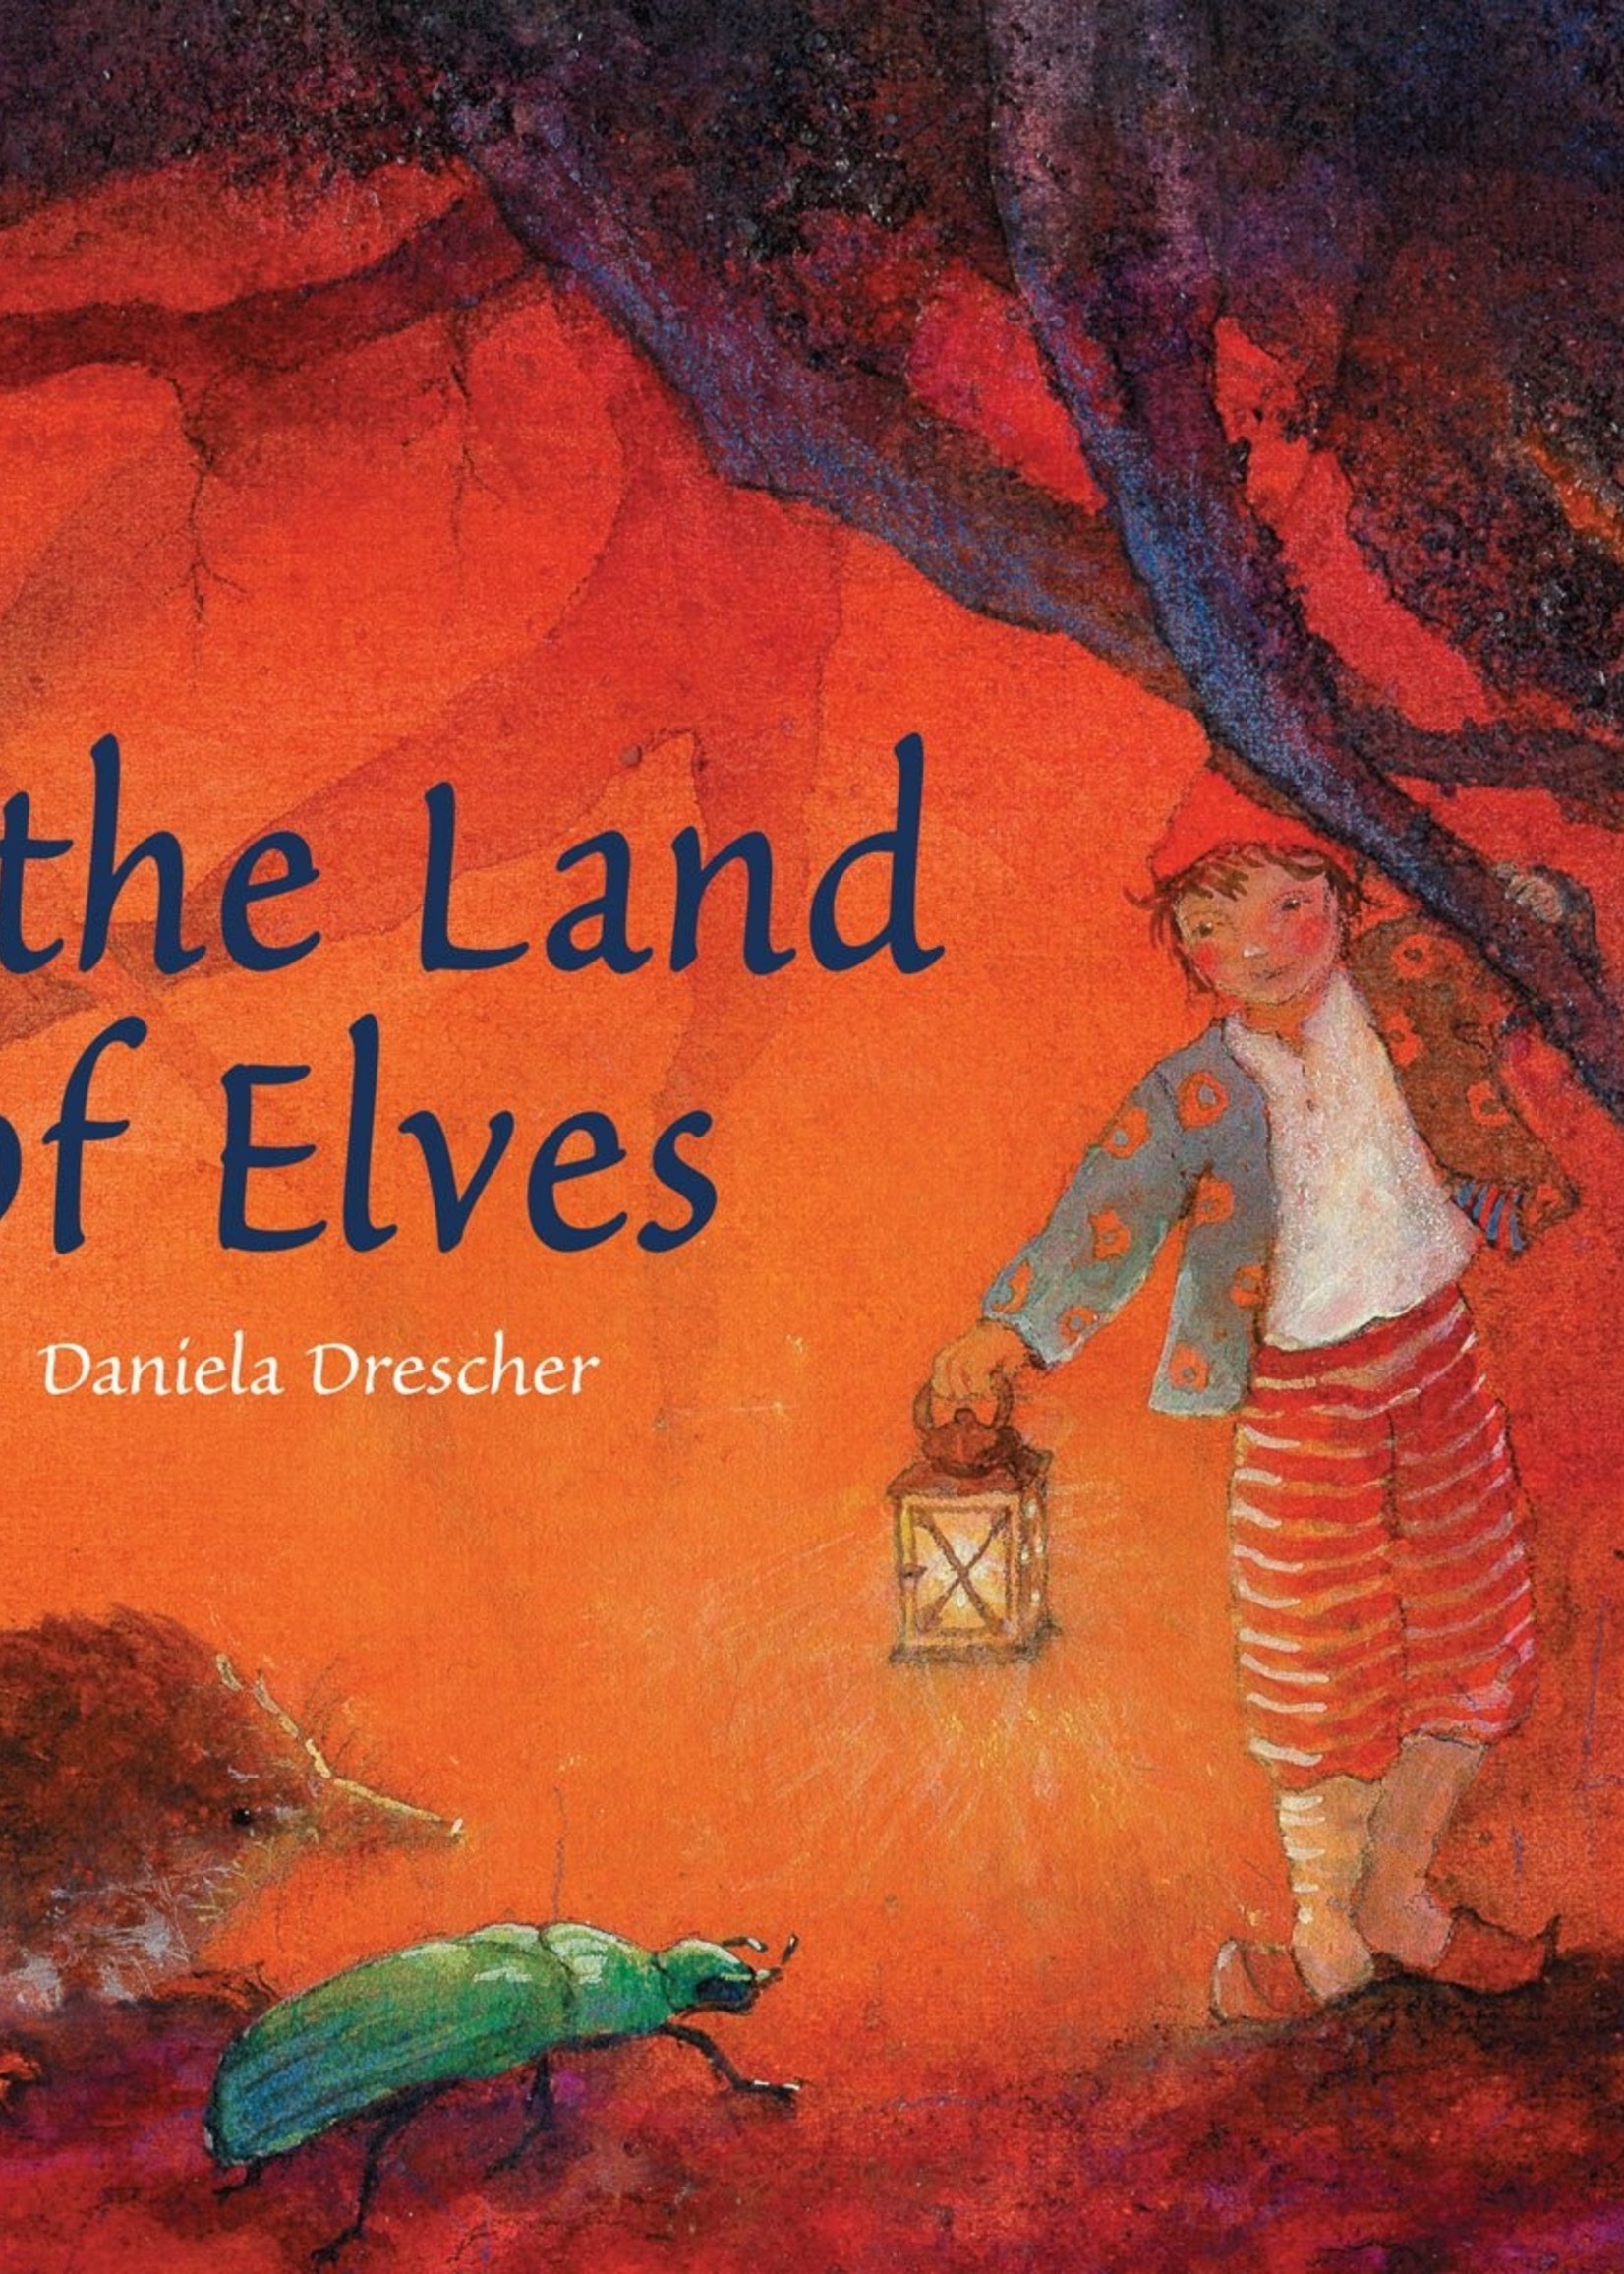 In the Land of Elves - Hardcover